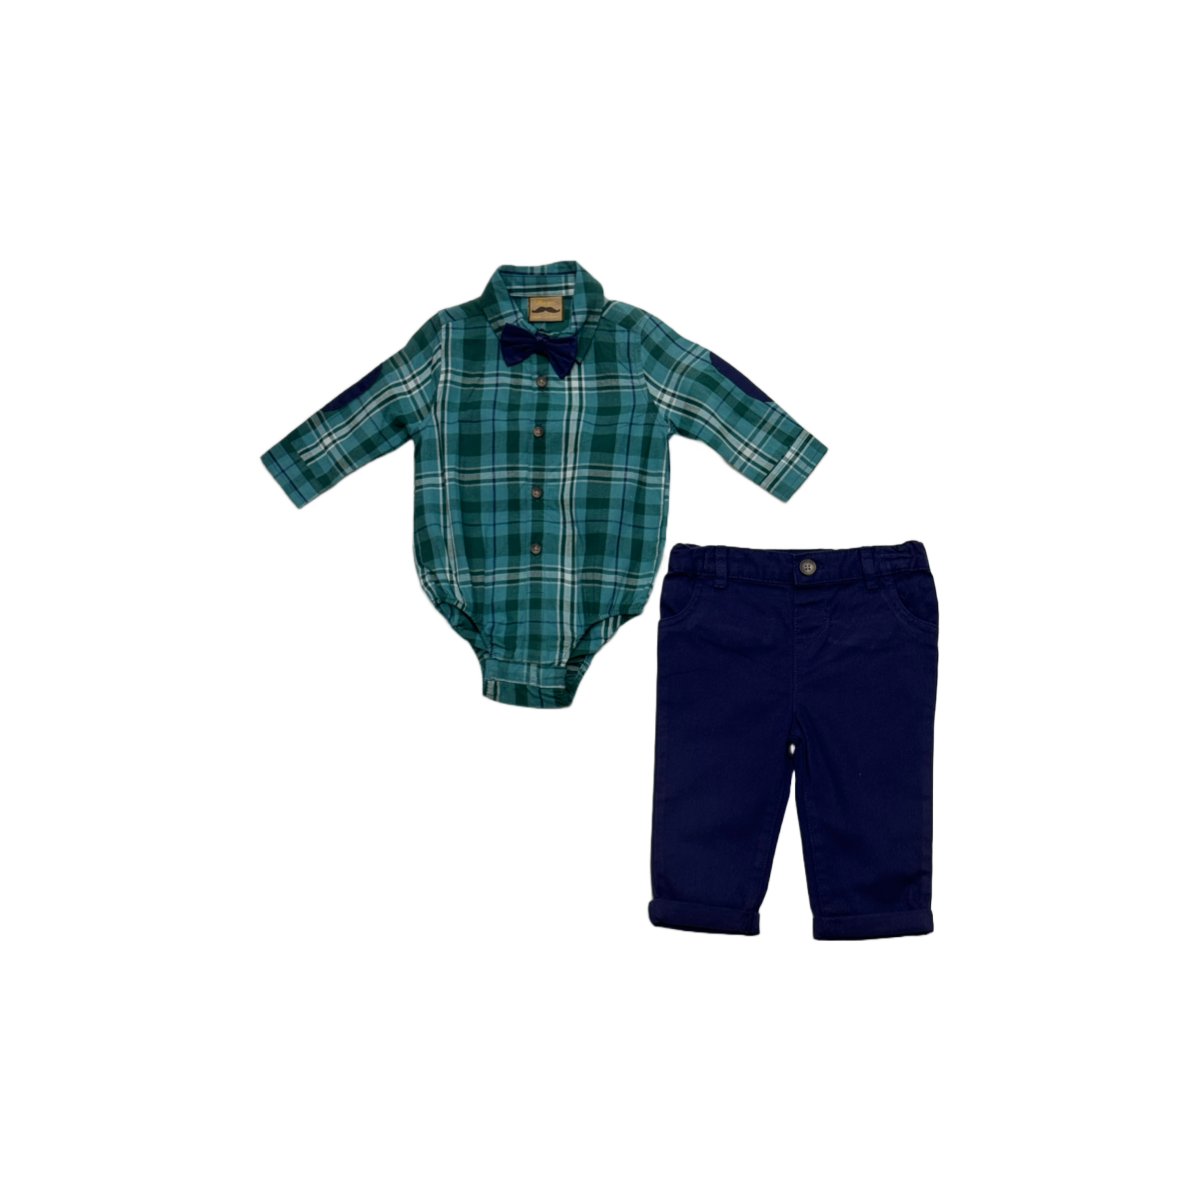 Baby Boy Semi-Formal Outfit